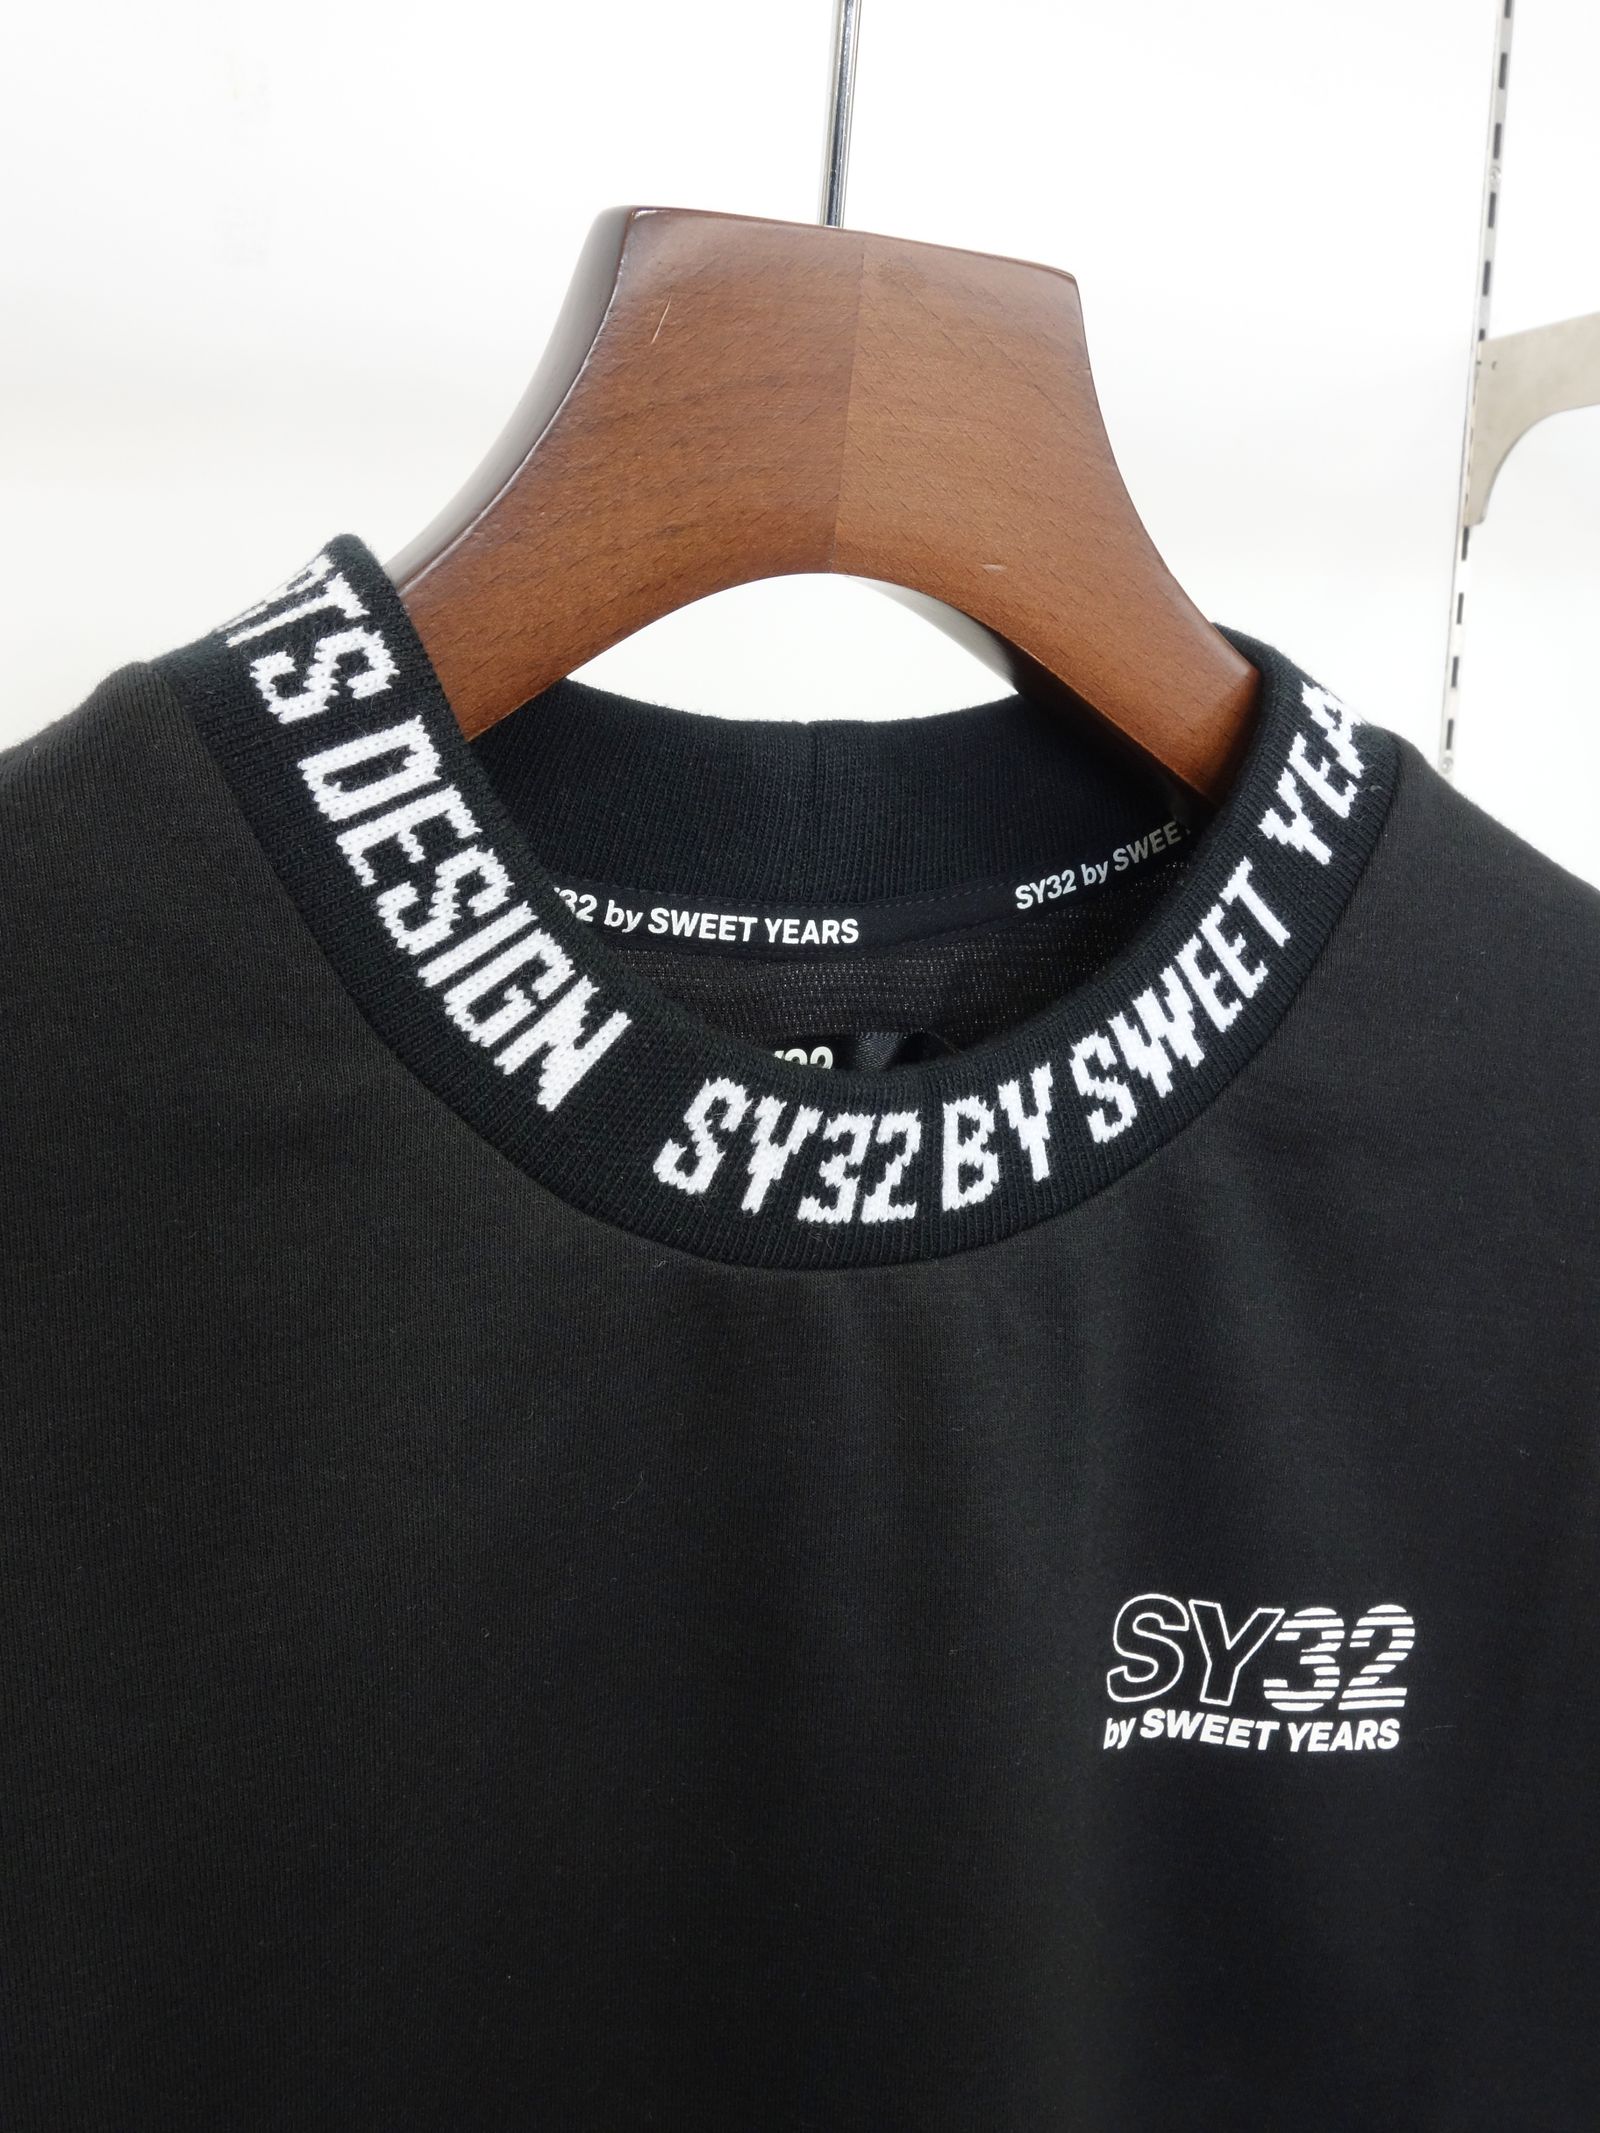 SY32 by SWEET YEARS - TAPE DESIGN L/S TEE / 11541 / ロングスリーブ 